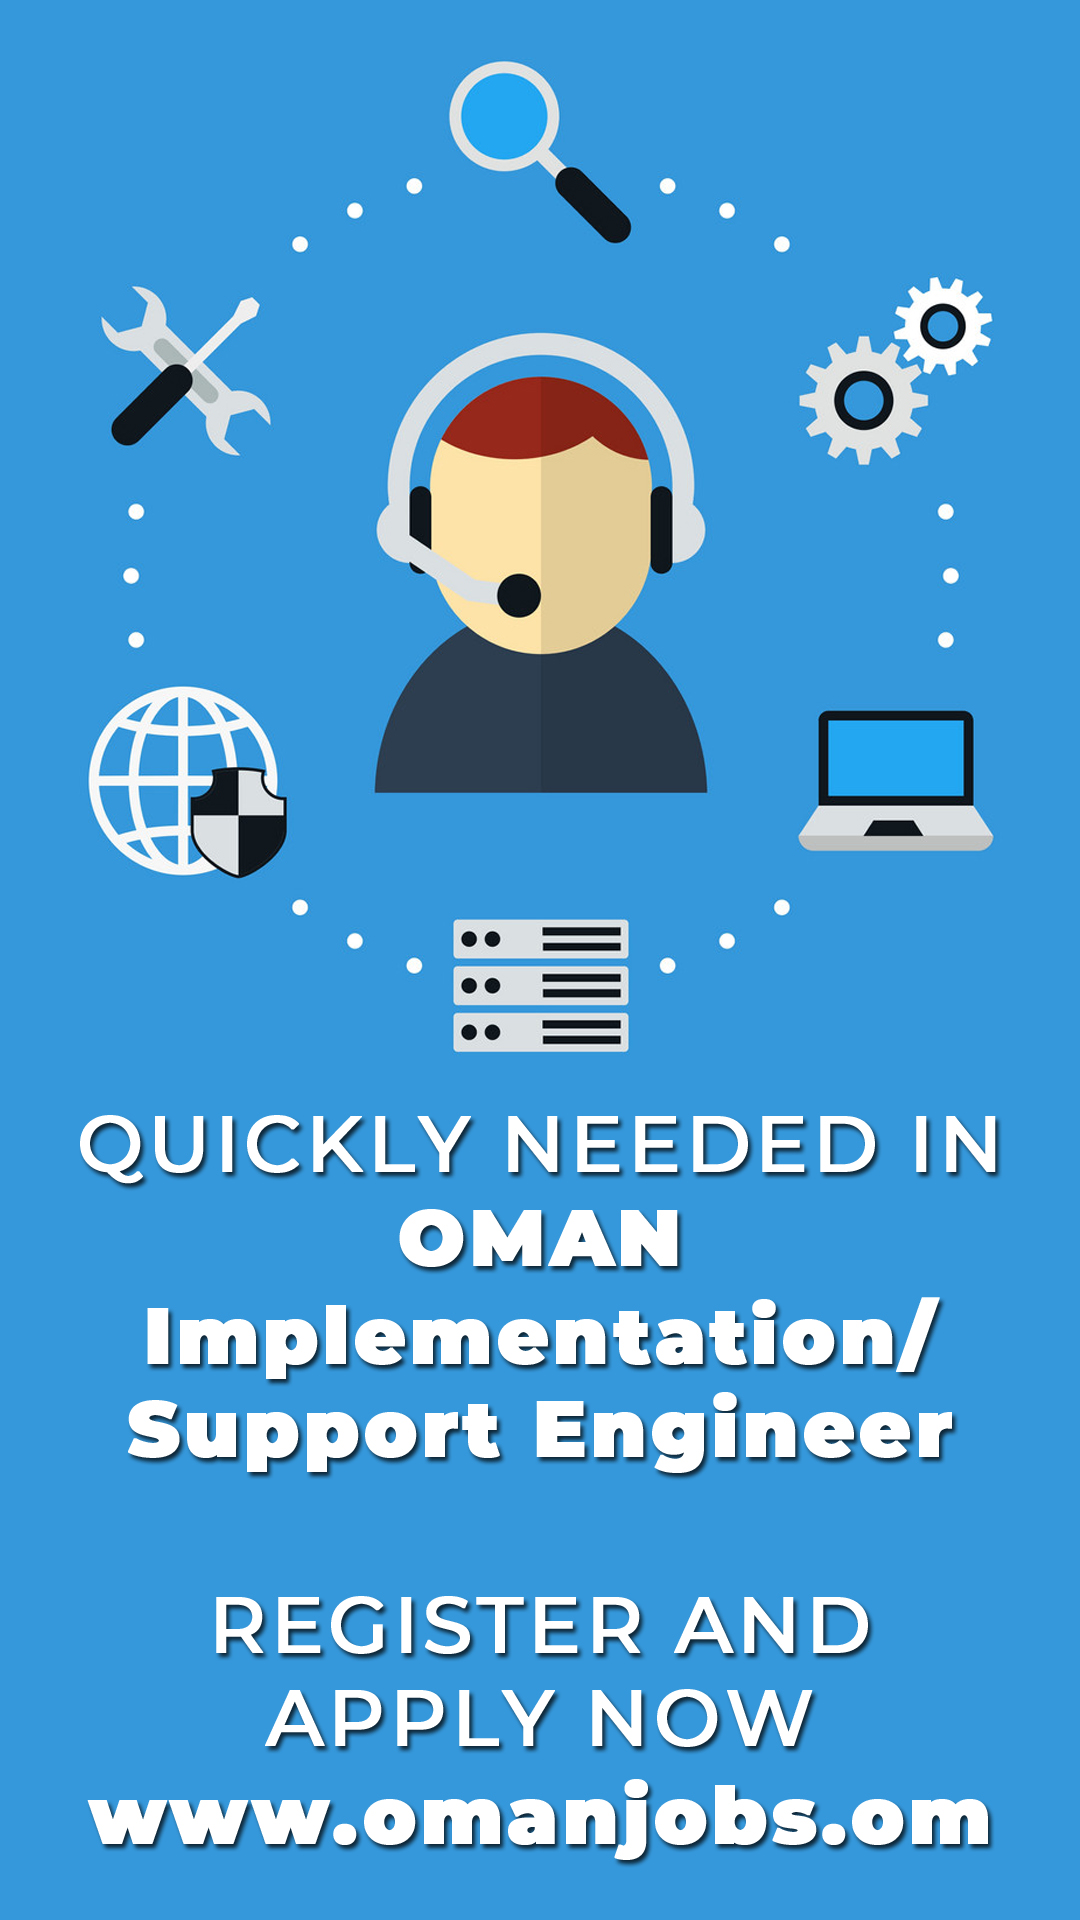 Hiring Implementation/ Support Engineer